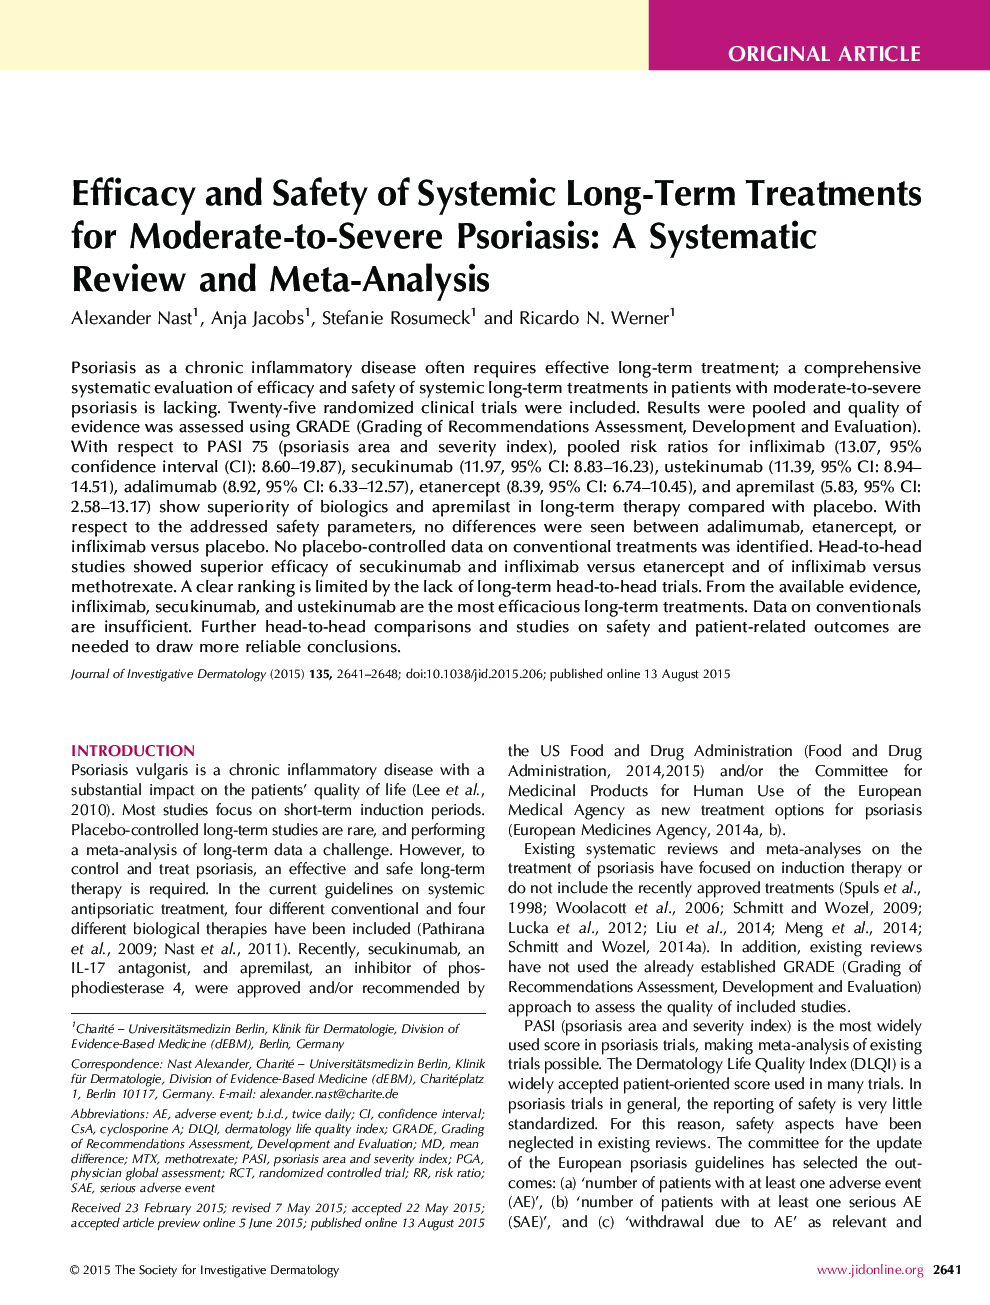 Original ArticleEfficacy and Safety of Systemic Long-Term Treatments for Moderate-to-Severe Psoriasis: A Systematic Review and Meta-Analysis